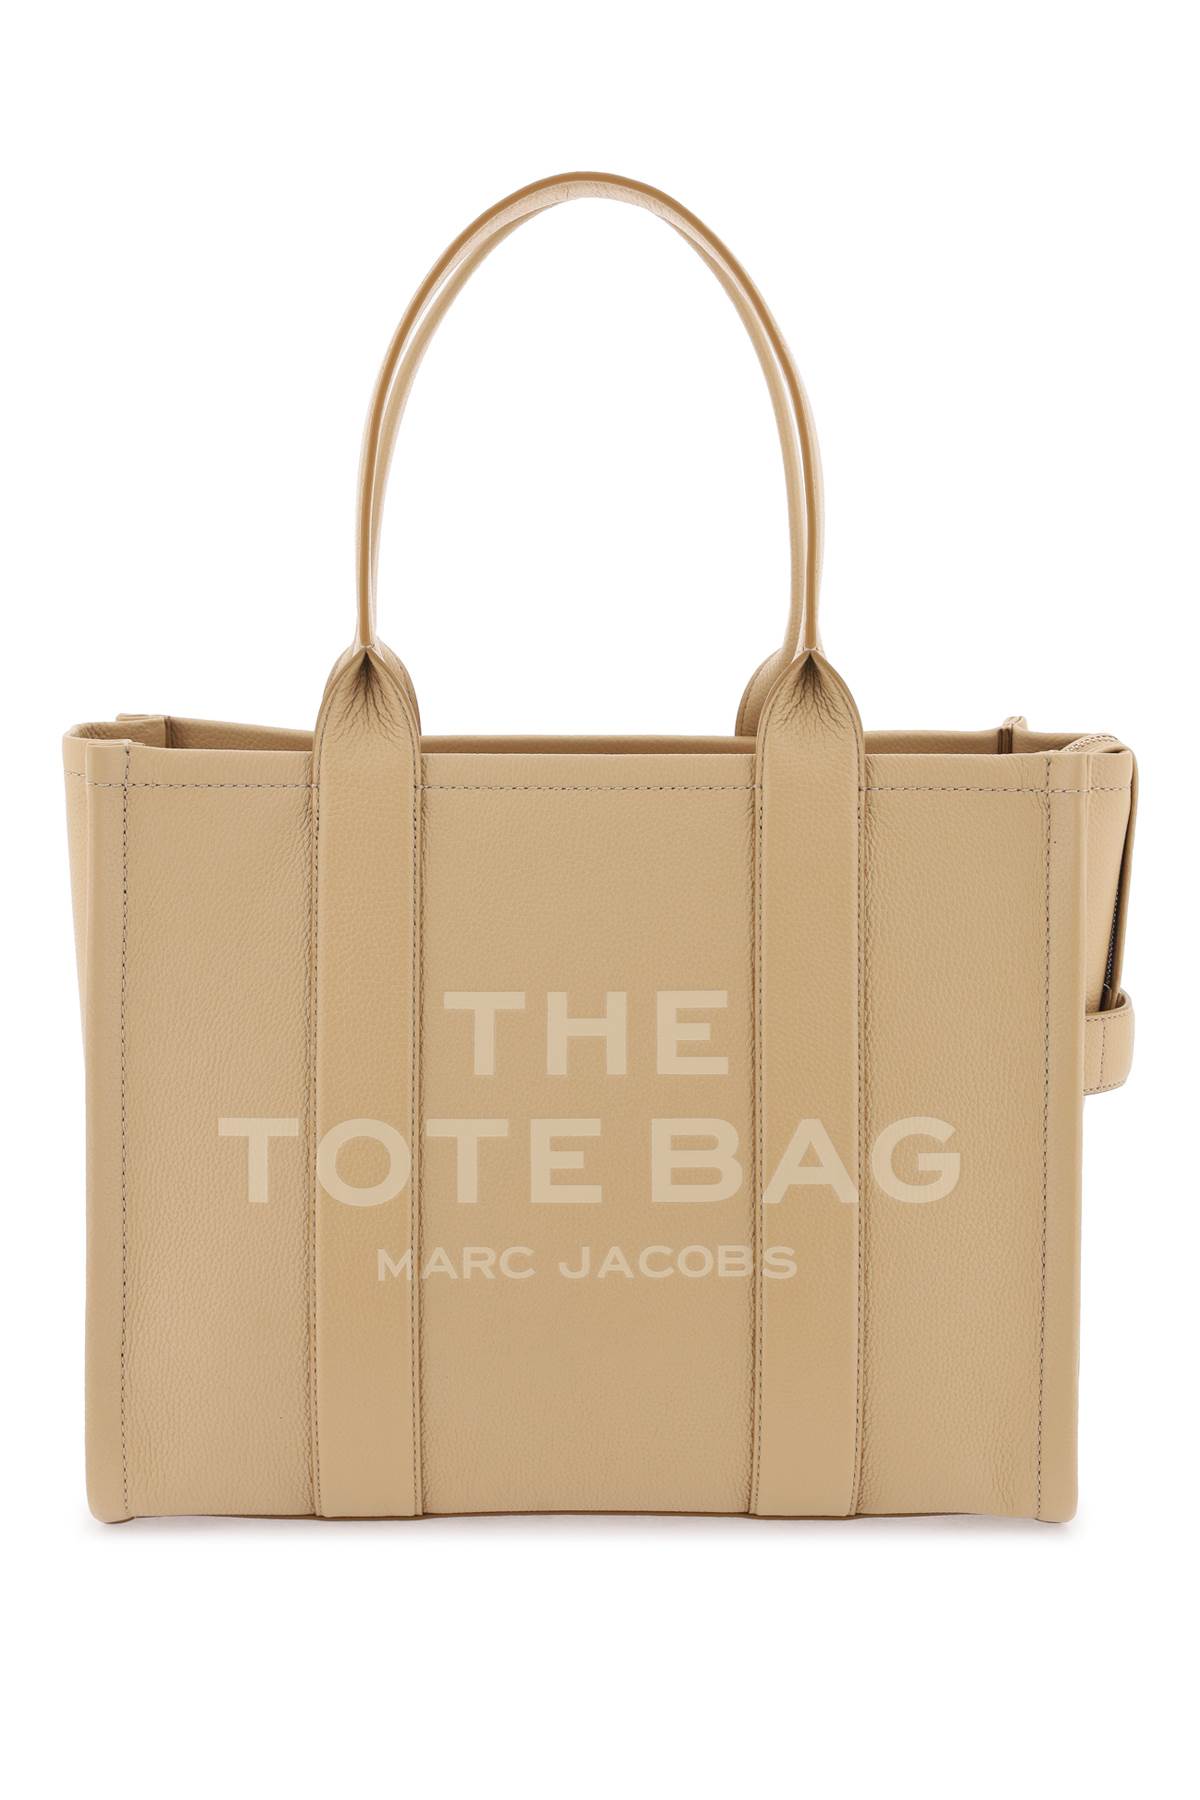 Marc Jacobs The Leather Large Tote Bag In Camel (black)